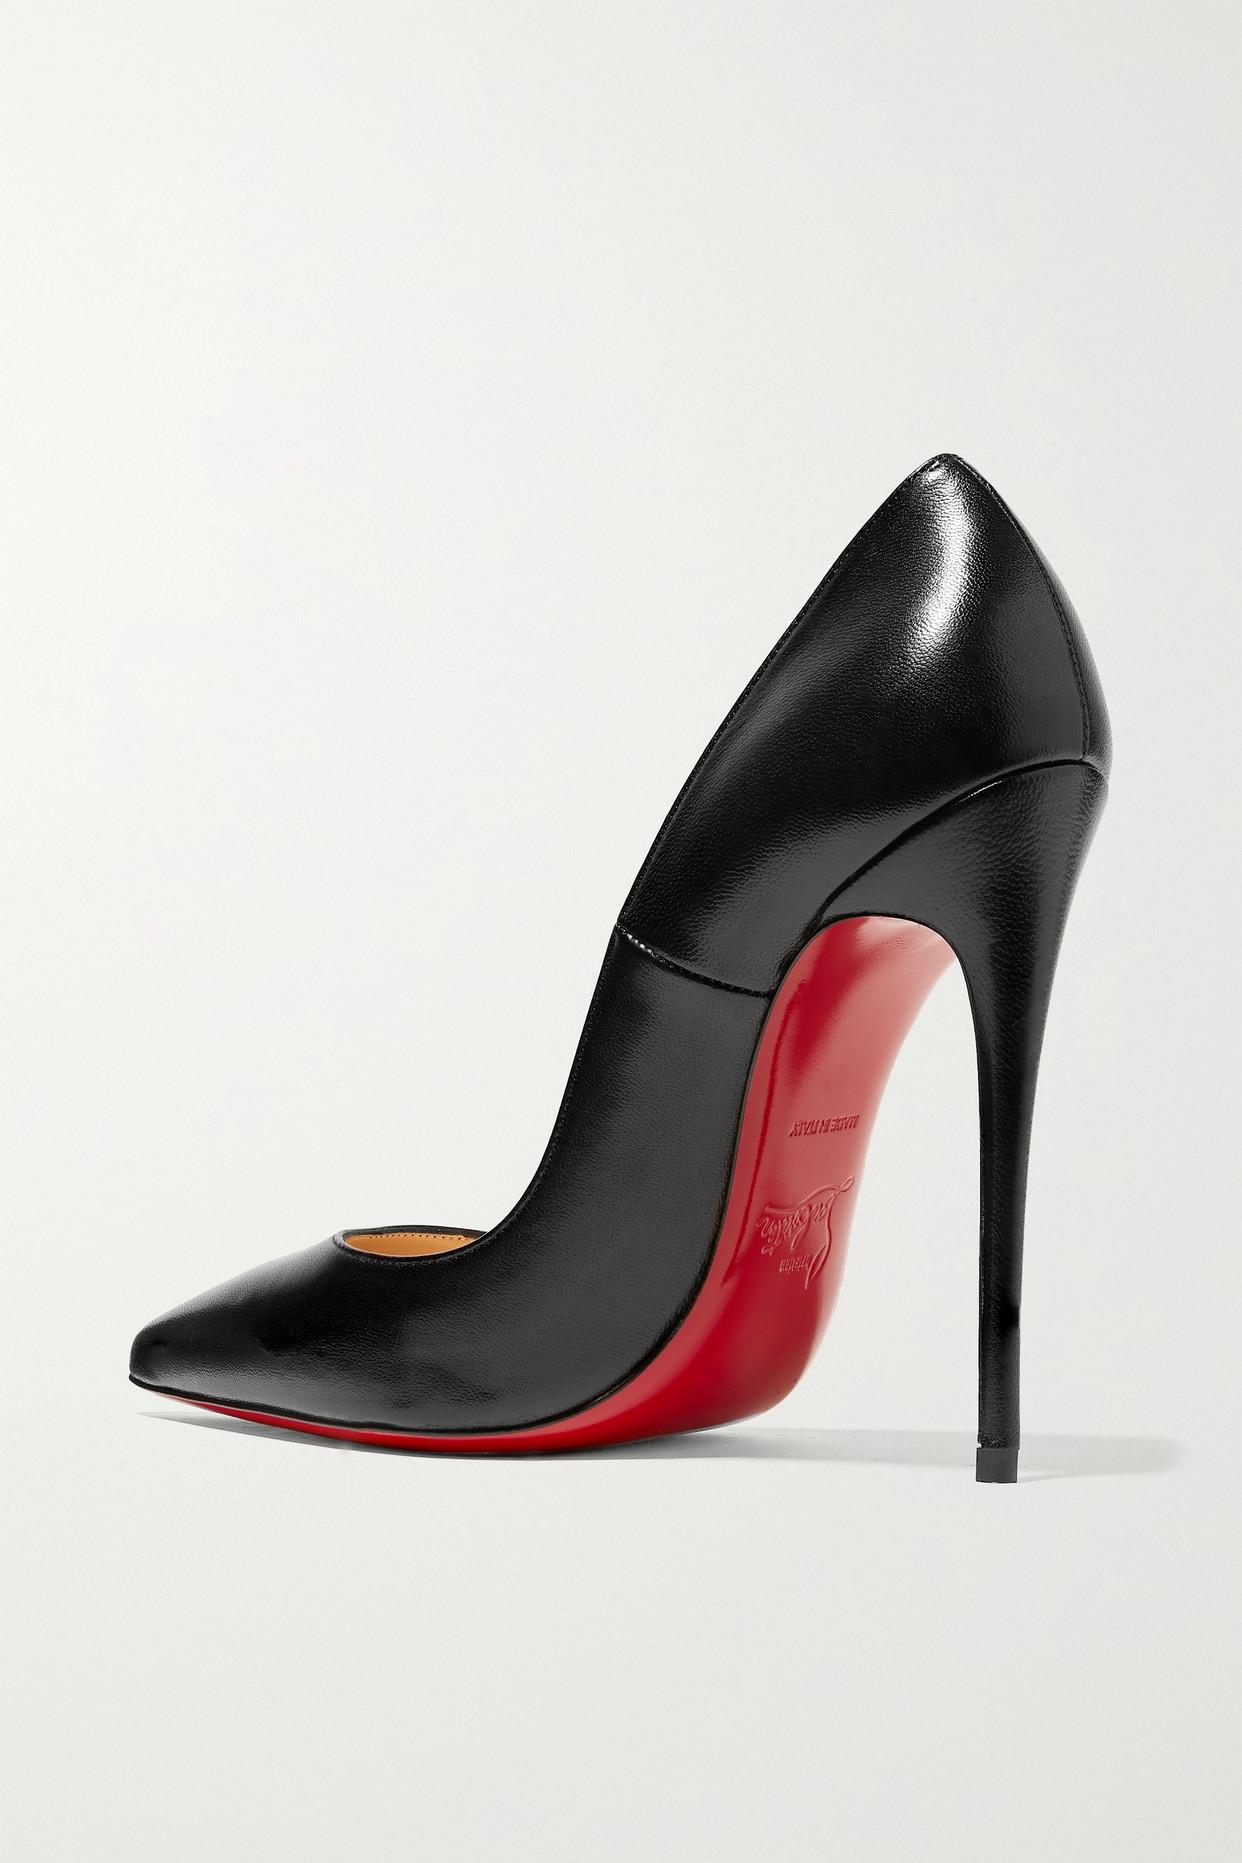 Christian Louboutin So Kate 120 embellished leather pumps